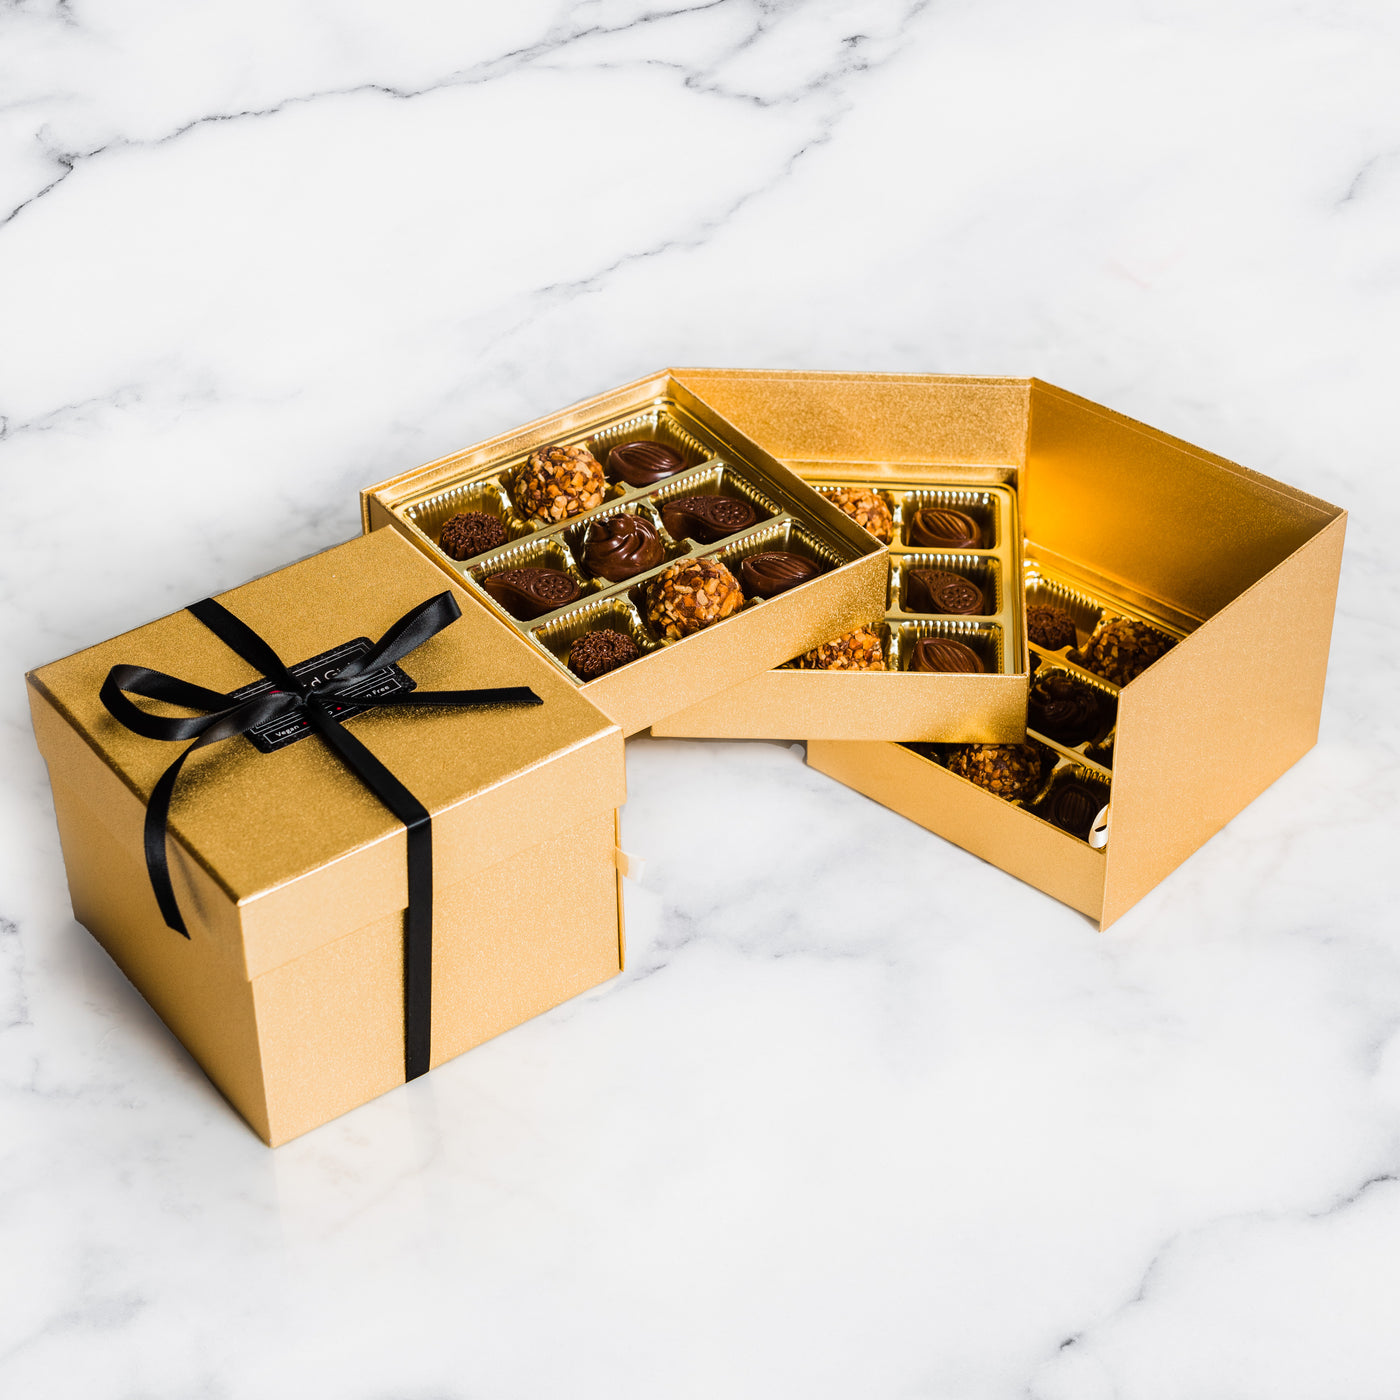 Boxes of Chocolate, Gift Box Delivery